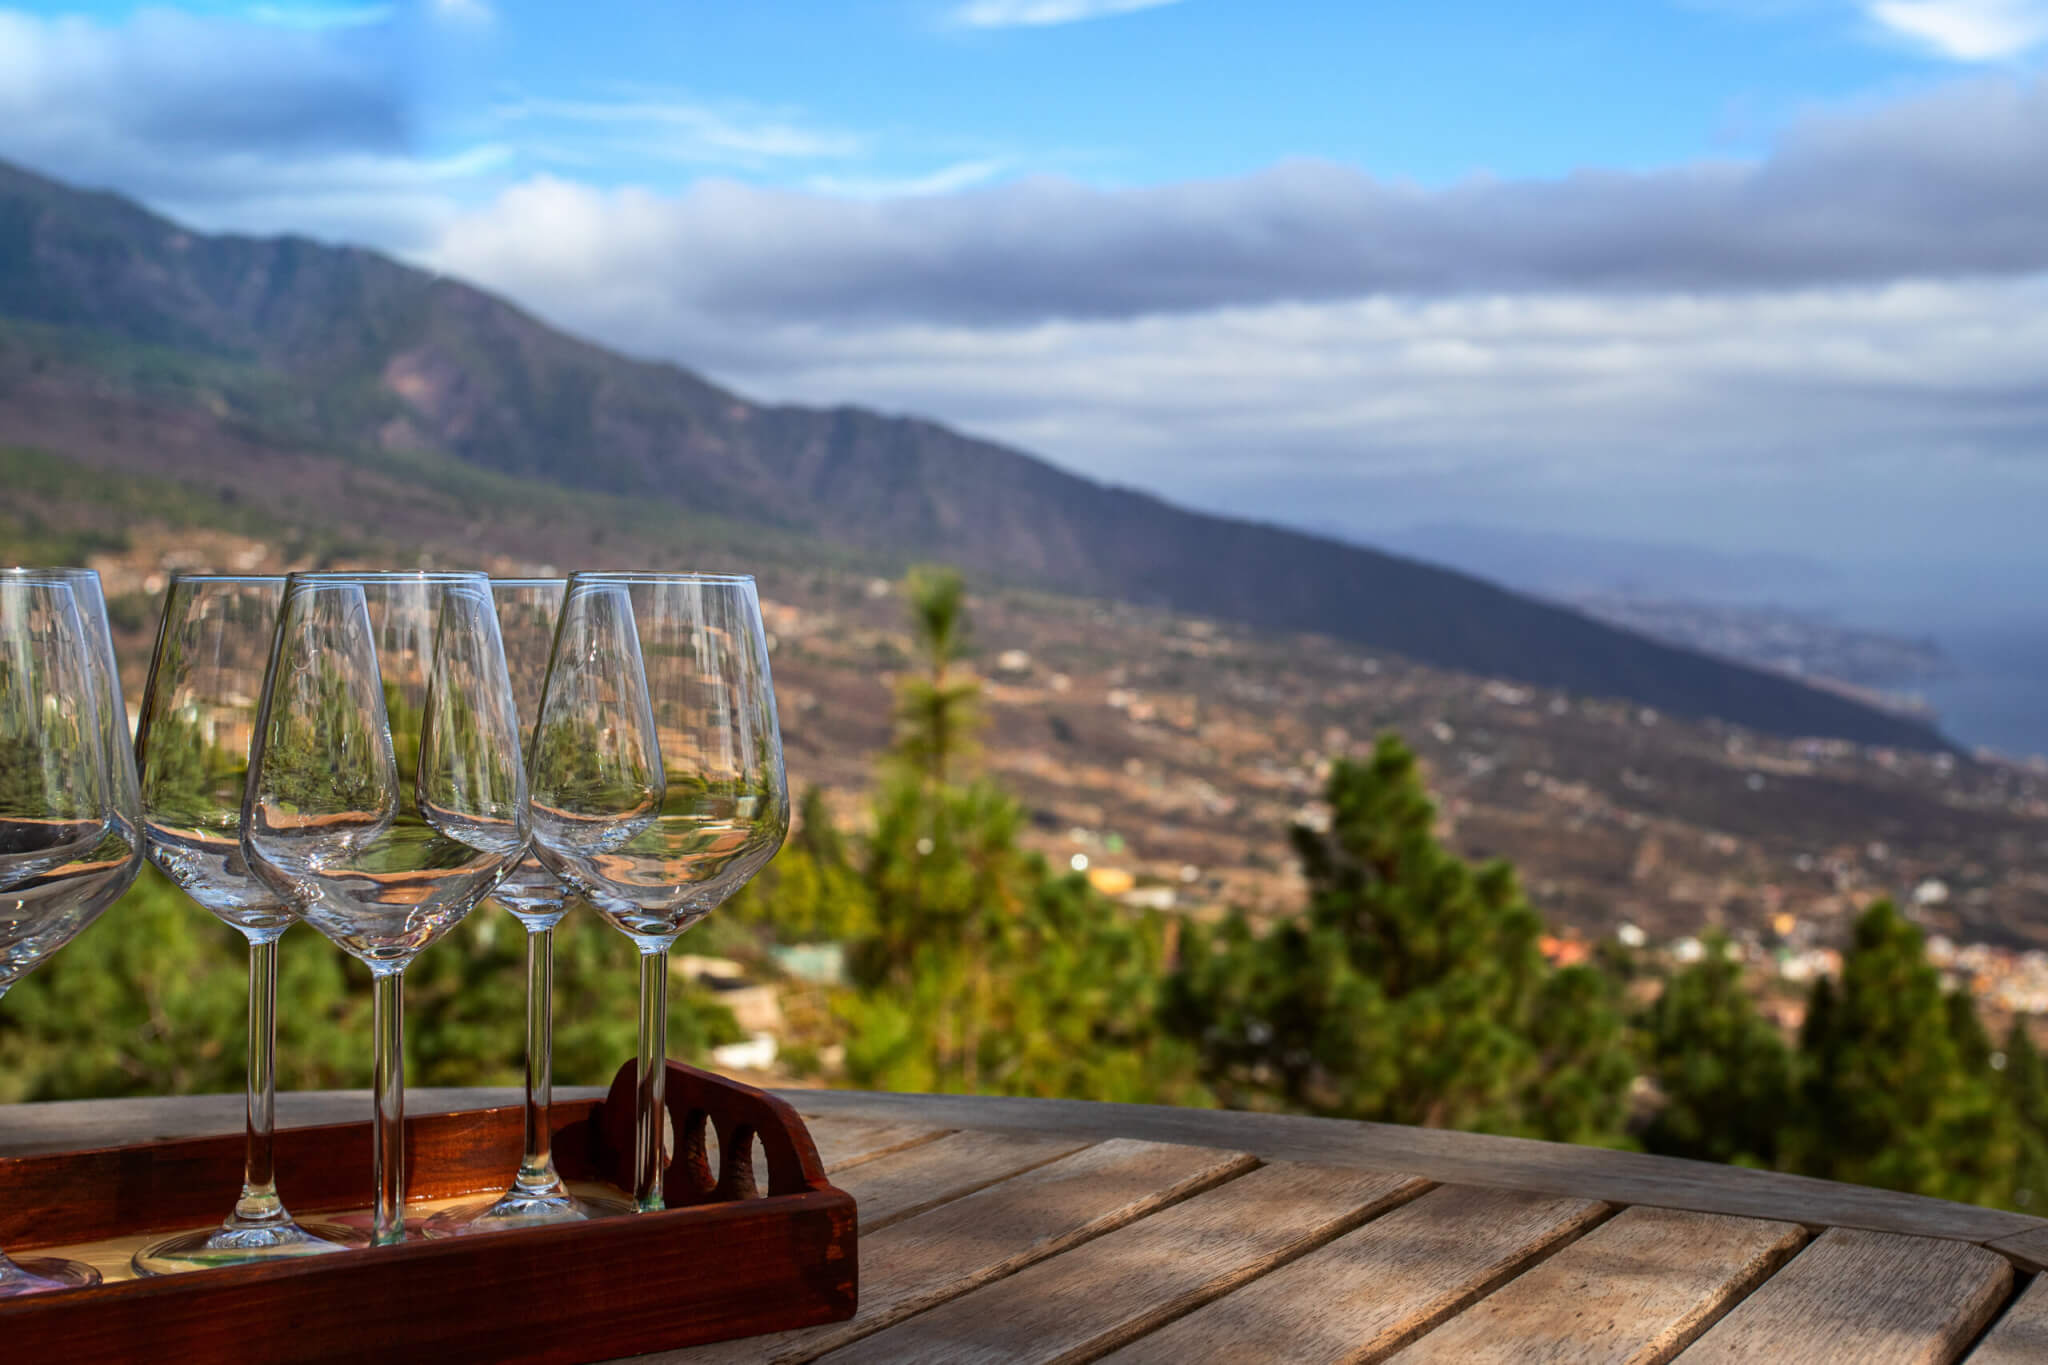 Empty wine glasses on wooden table on vineyards land in the mountains. Wine tasting experience concept.